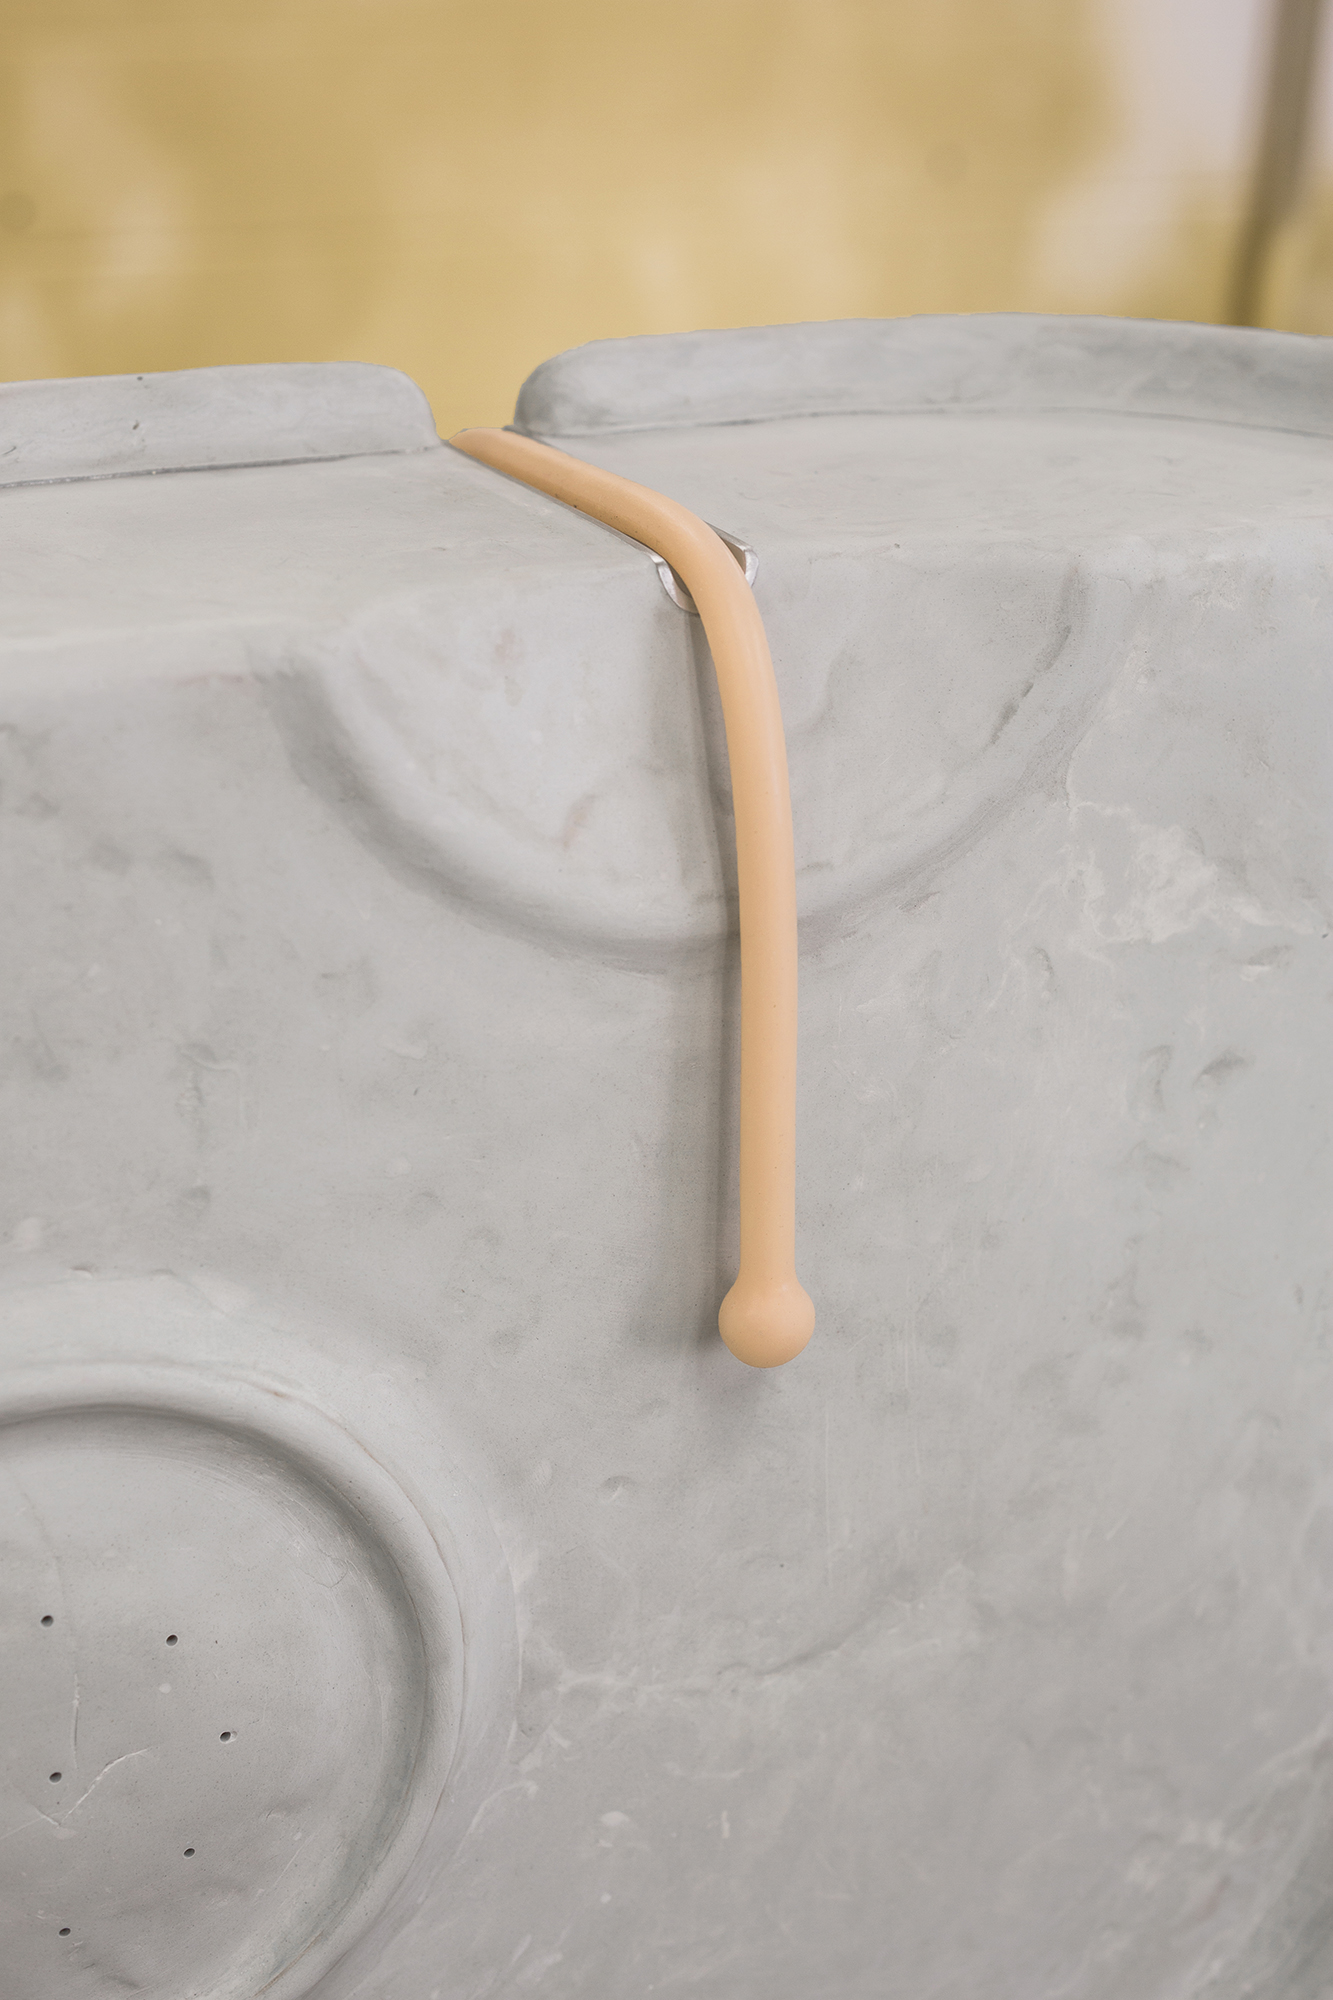 Eavesdrop (detail), 2017, Cast Silicone Bungee Cord, Toddler’s High Chair Tray, Epoxy Putty, Aluminum, MDF, 22 x 17 x 7 inches